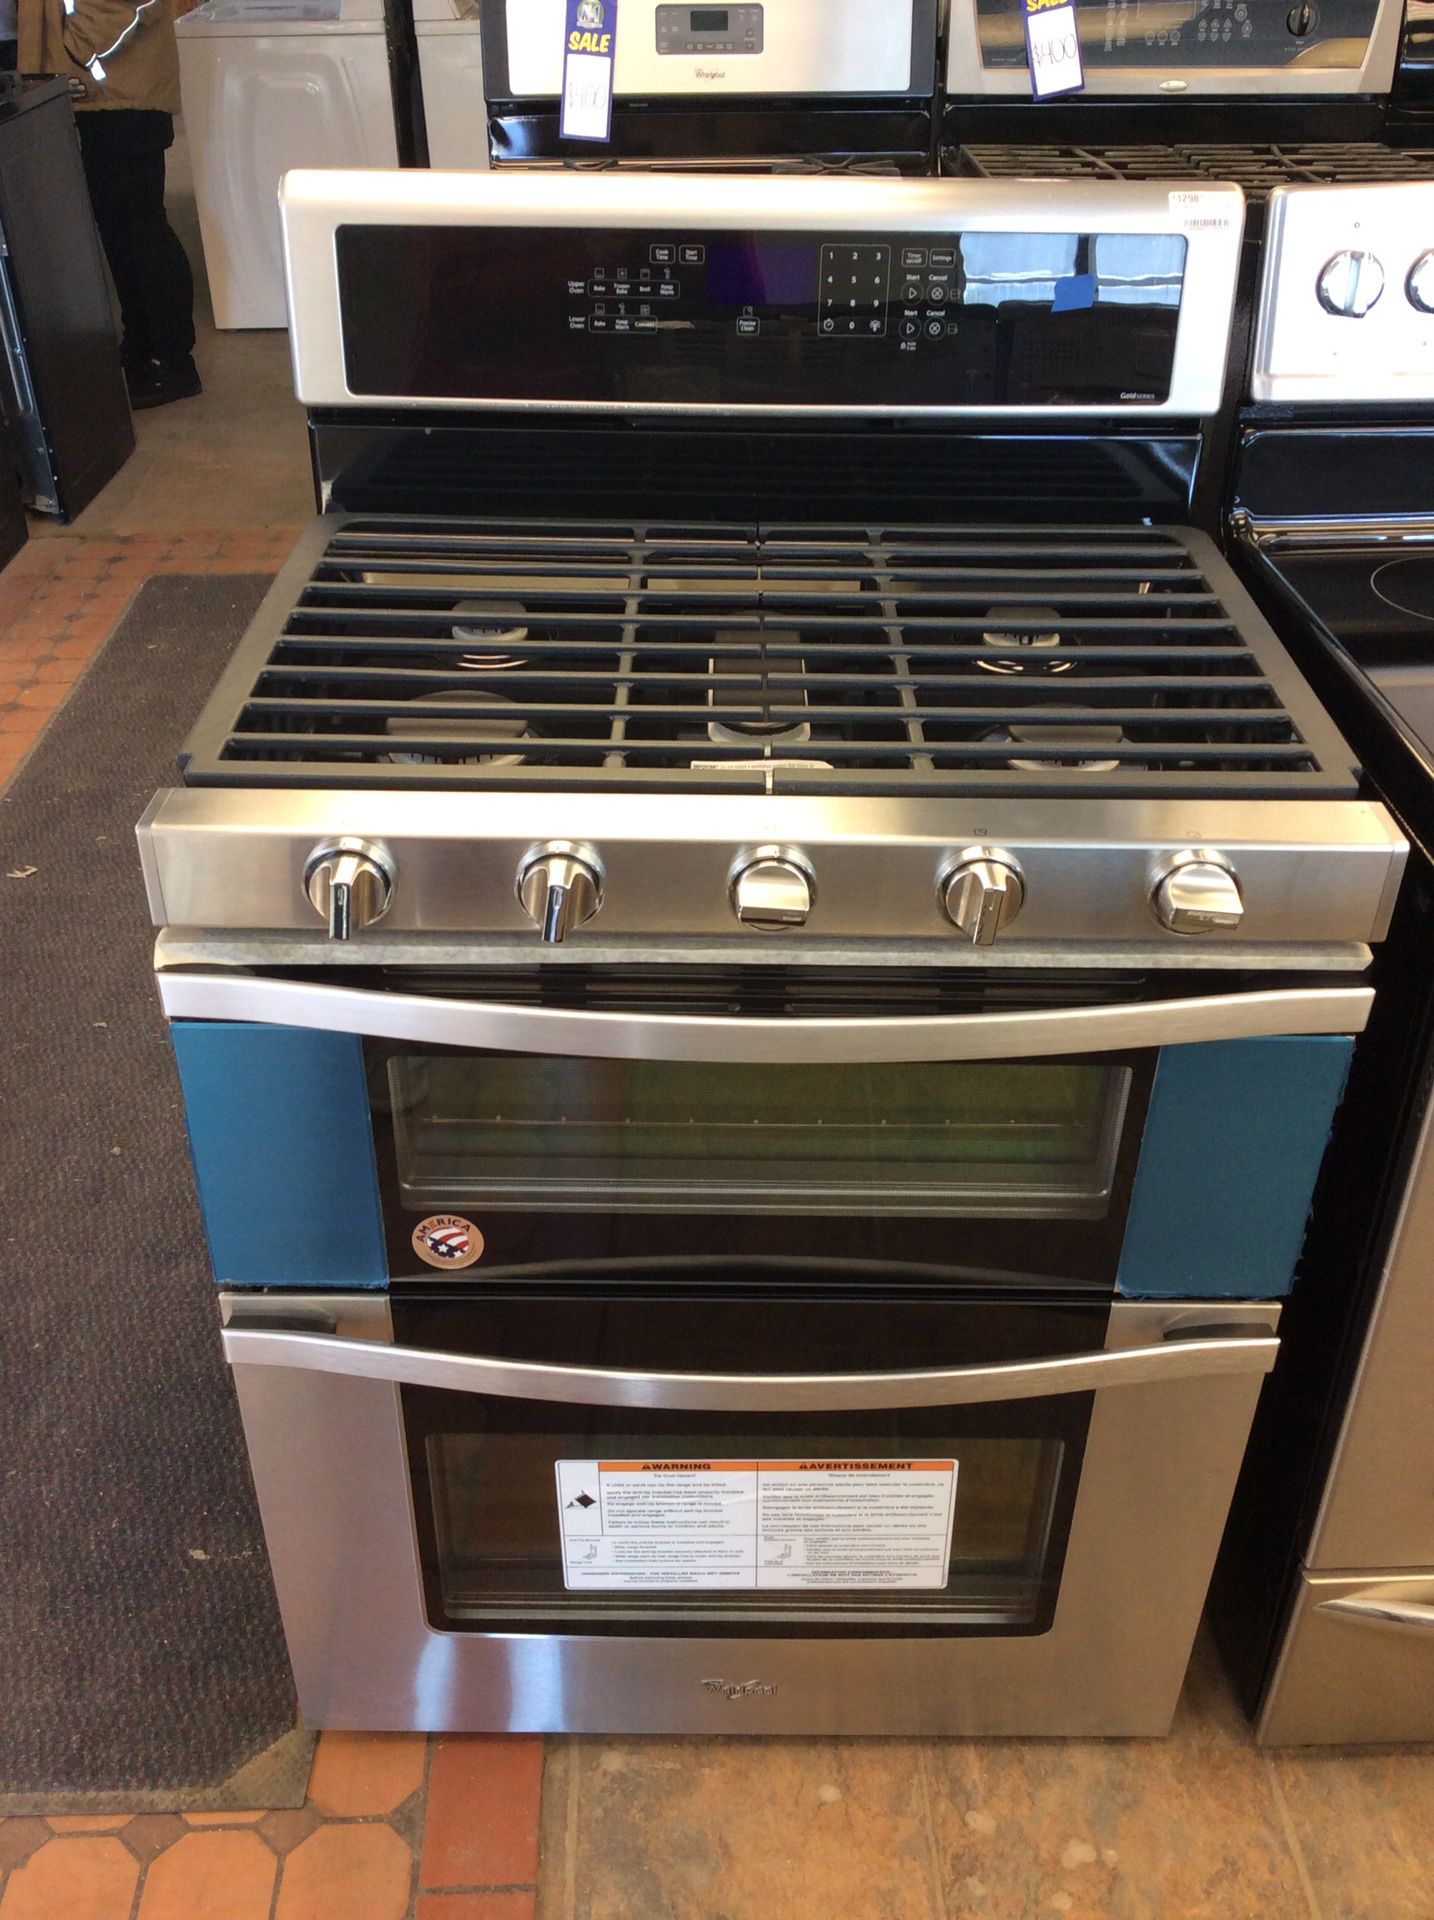 (Anoka 4263-SM LM) Whirlpool Stainless Steel 5 Burner Double Oven Gas Stove